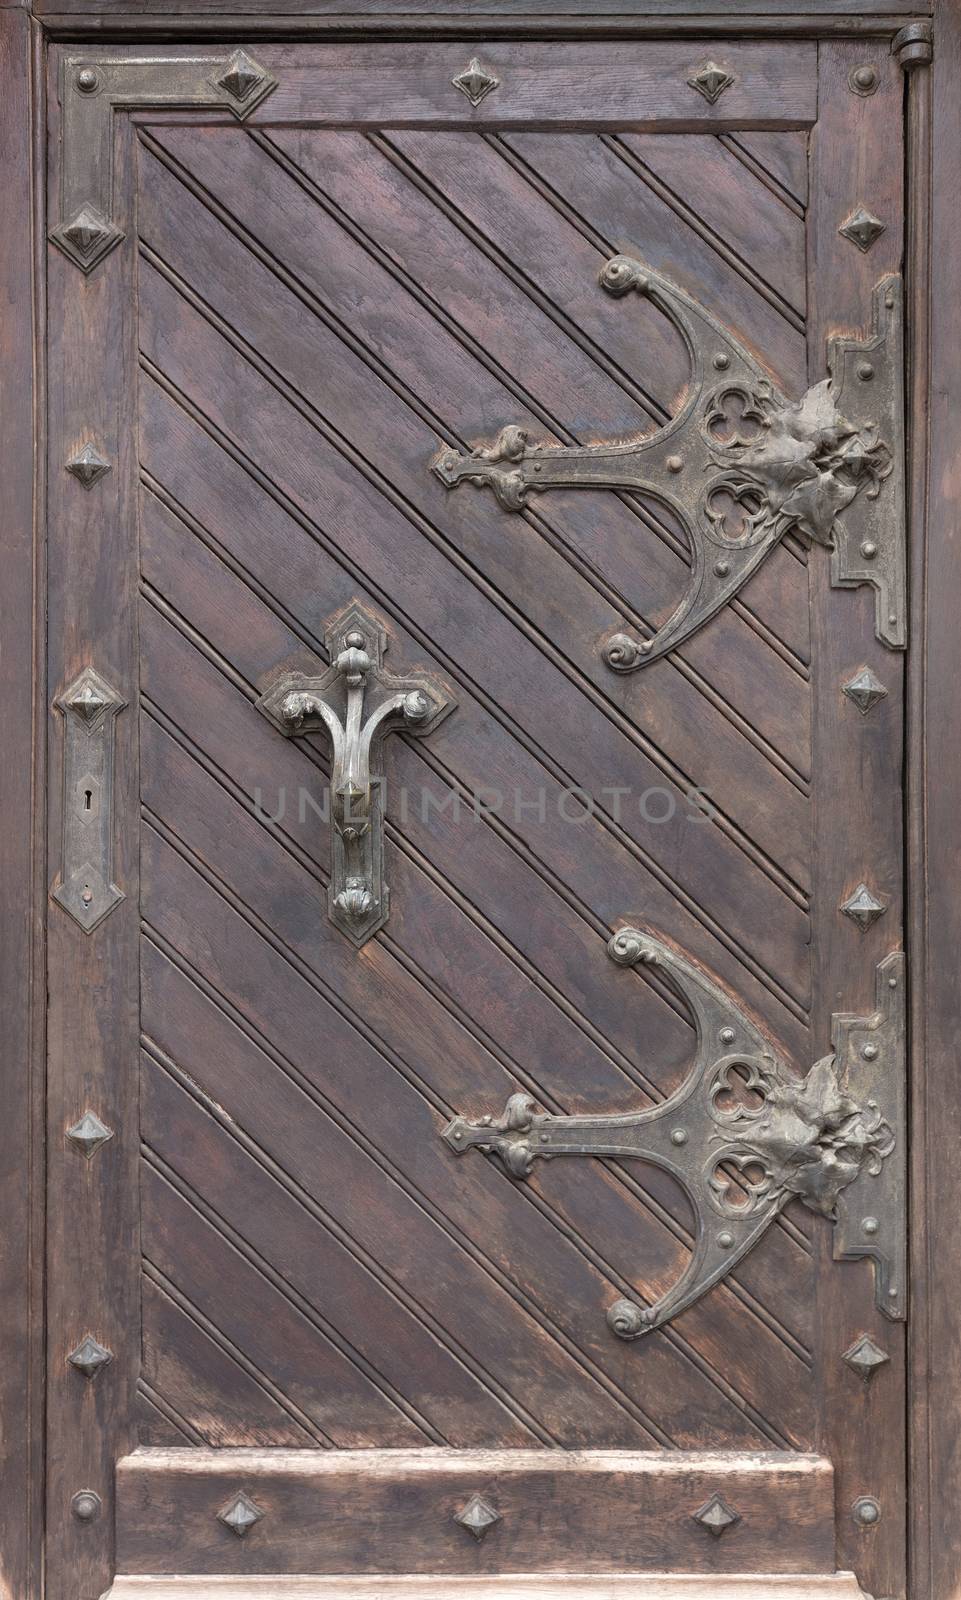 Ancient antique wooden doors with wrought iron loops, massive forged door handle and cross bars.